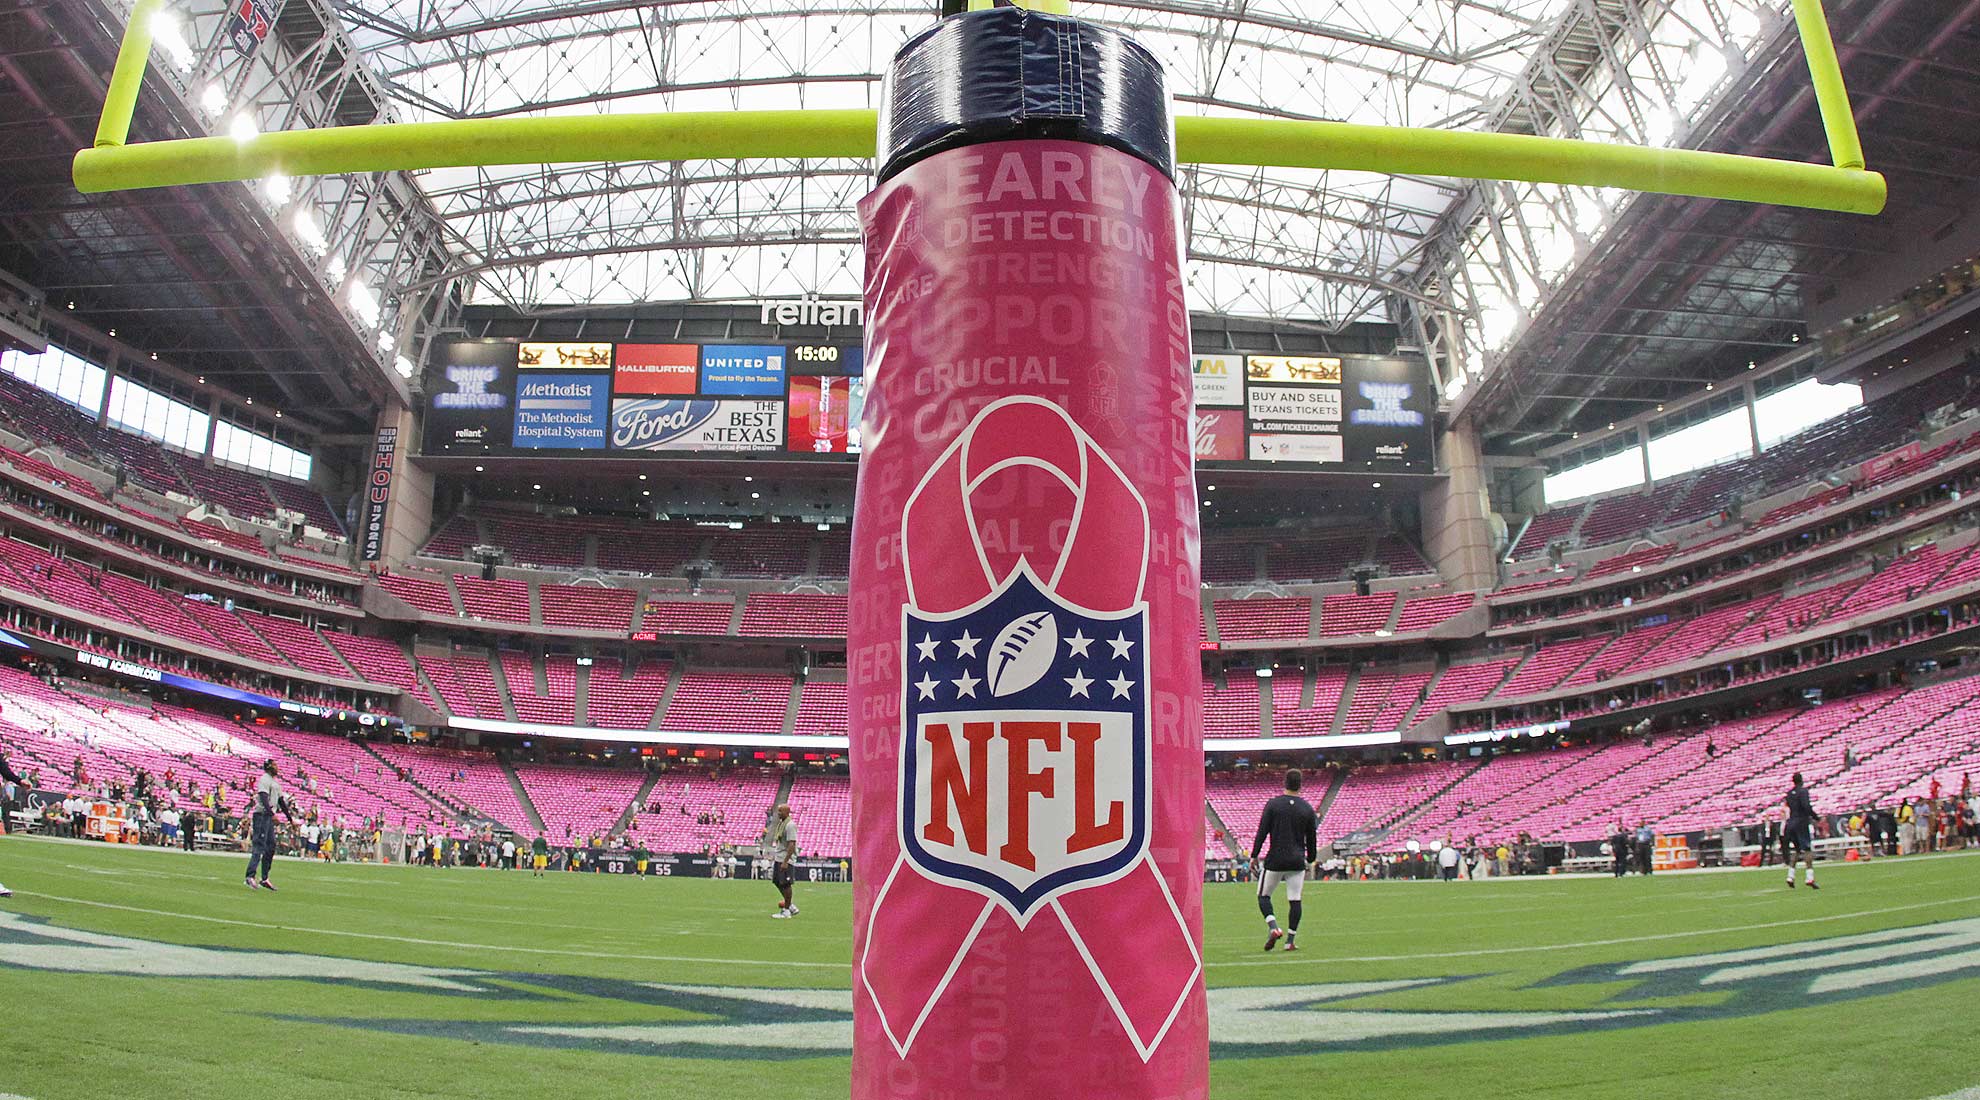 NFL's Breast Cancer Program Does Real Good